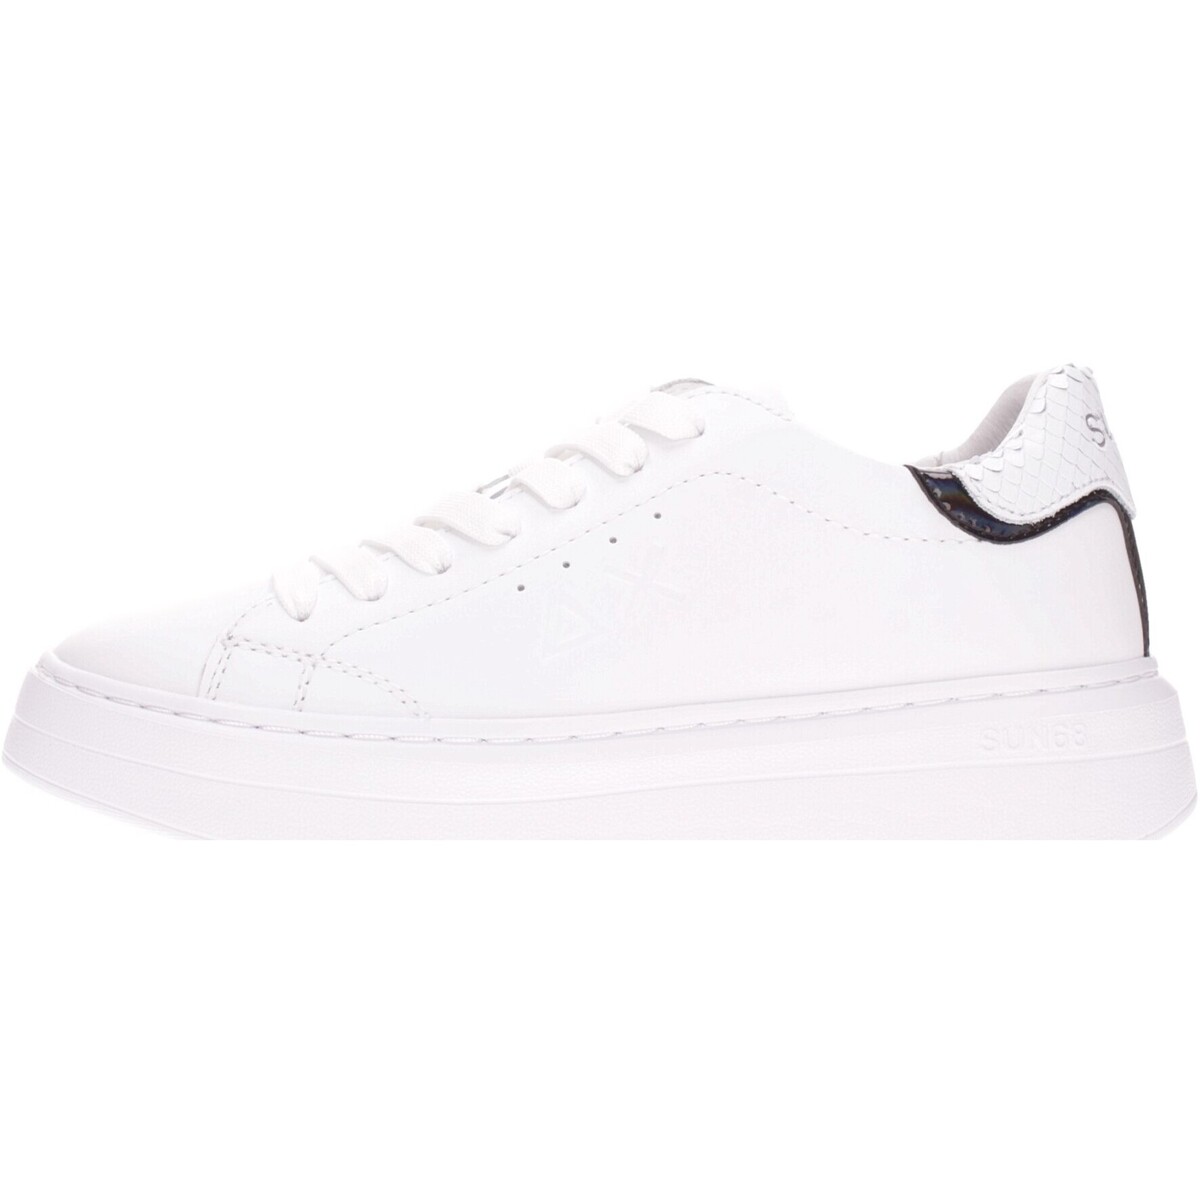 Chaussures Femme Versace Jeans Co  Blanc